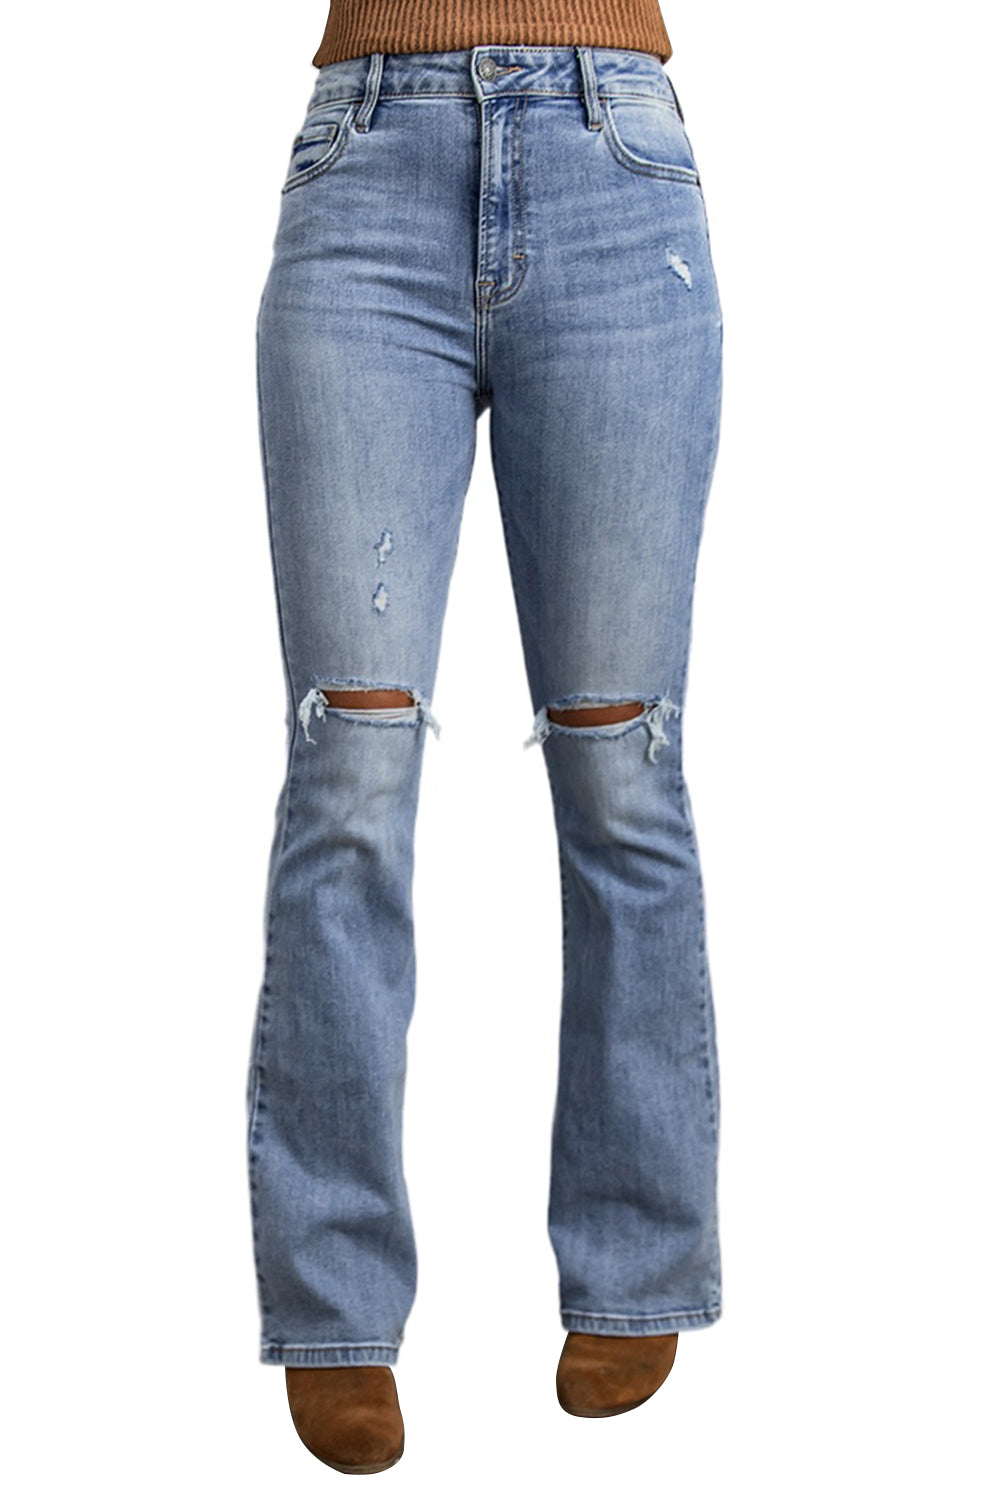 Blue Wash Knee Slits Ripped Flare Jeans